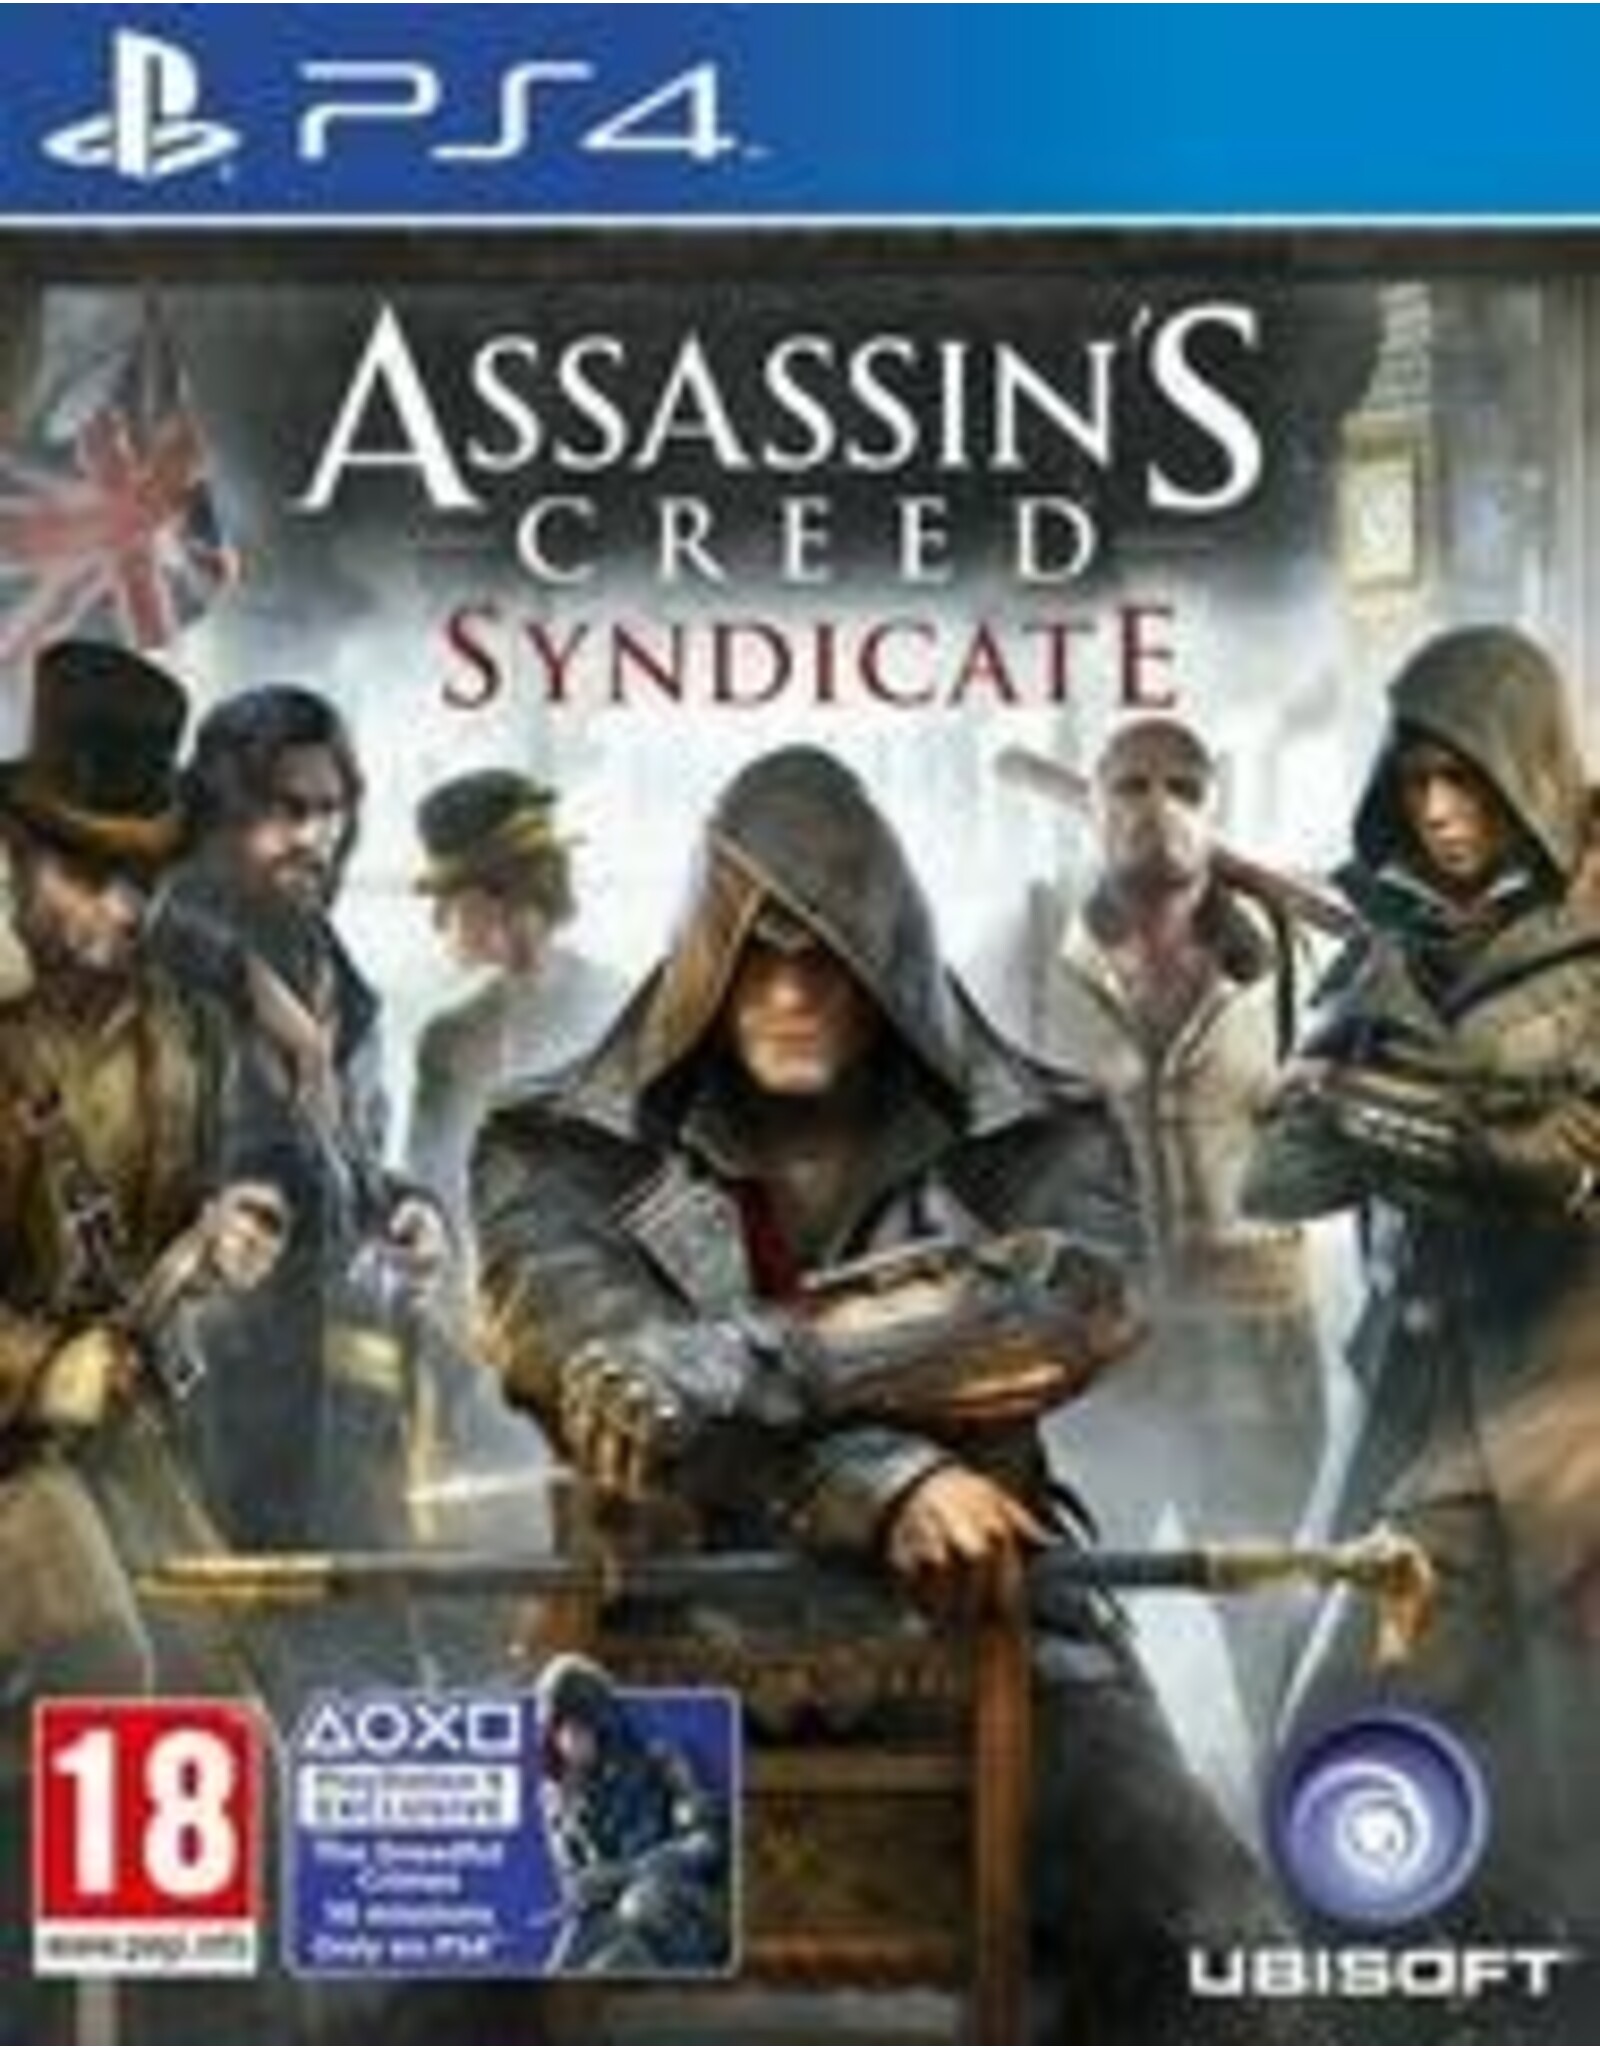 Playstation 4 Assassin's Creed Syndicate - PAL Import (Used)